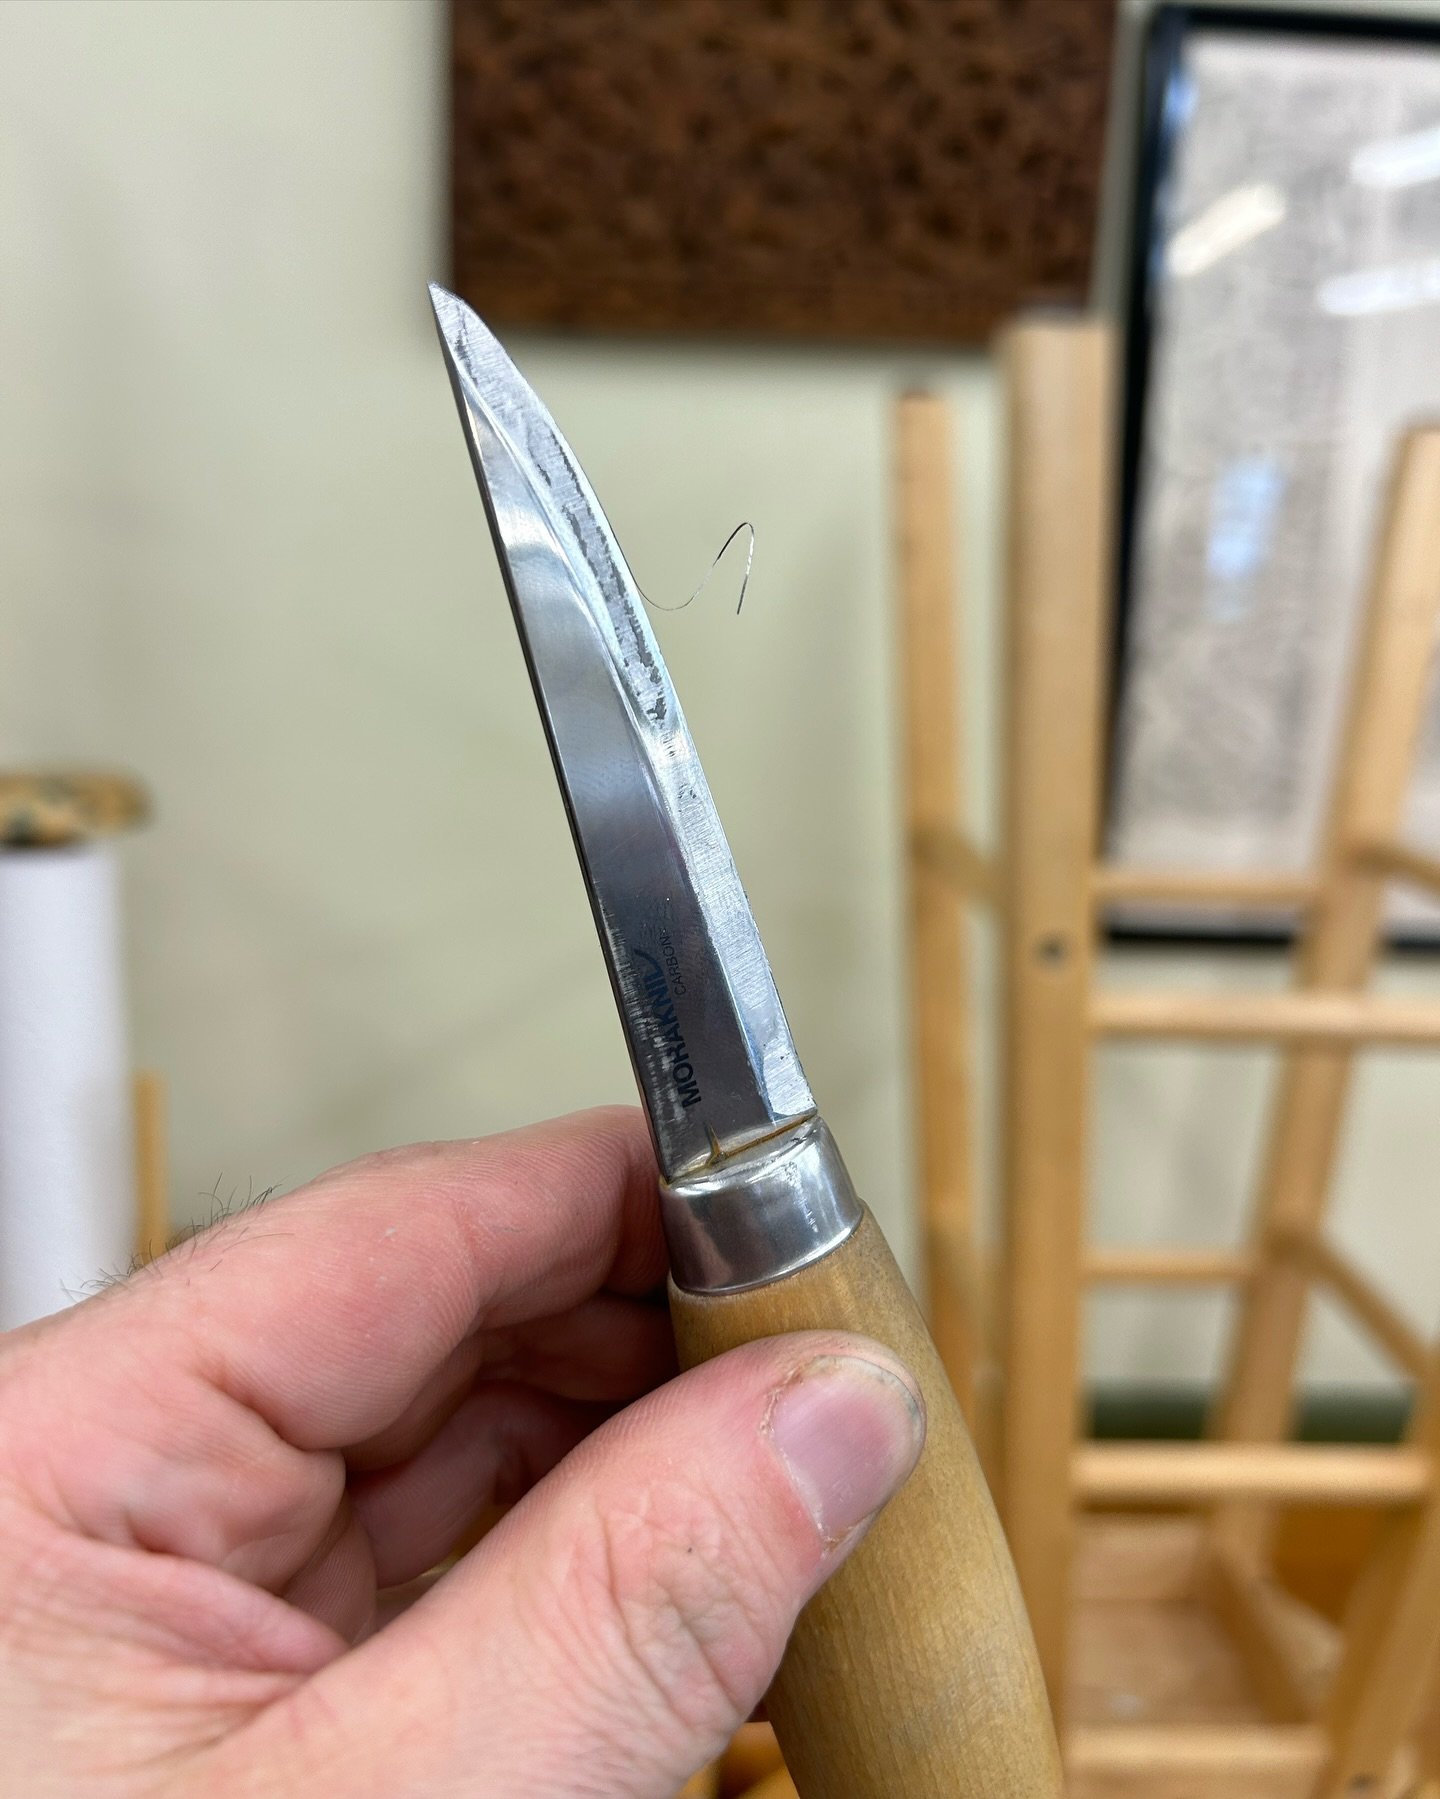 I present to you - the elusive and magical burr!! Look at that wire edge curling off the steel! This is moments away from being sharper than darth Vader&rsquo;s lightsaber!

Every class I teach, I incorporate sharpening into the curriculum. I teach h